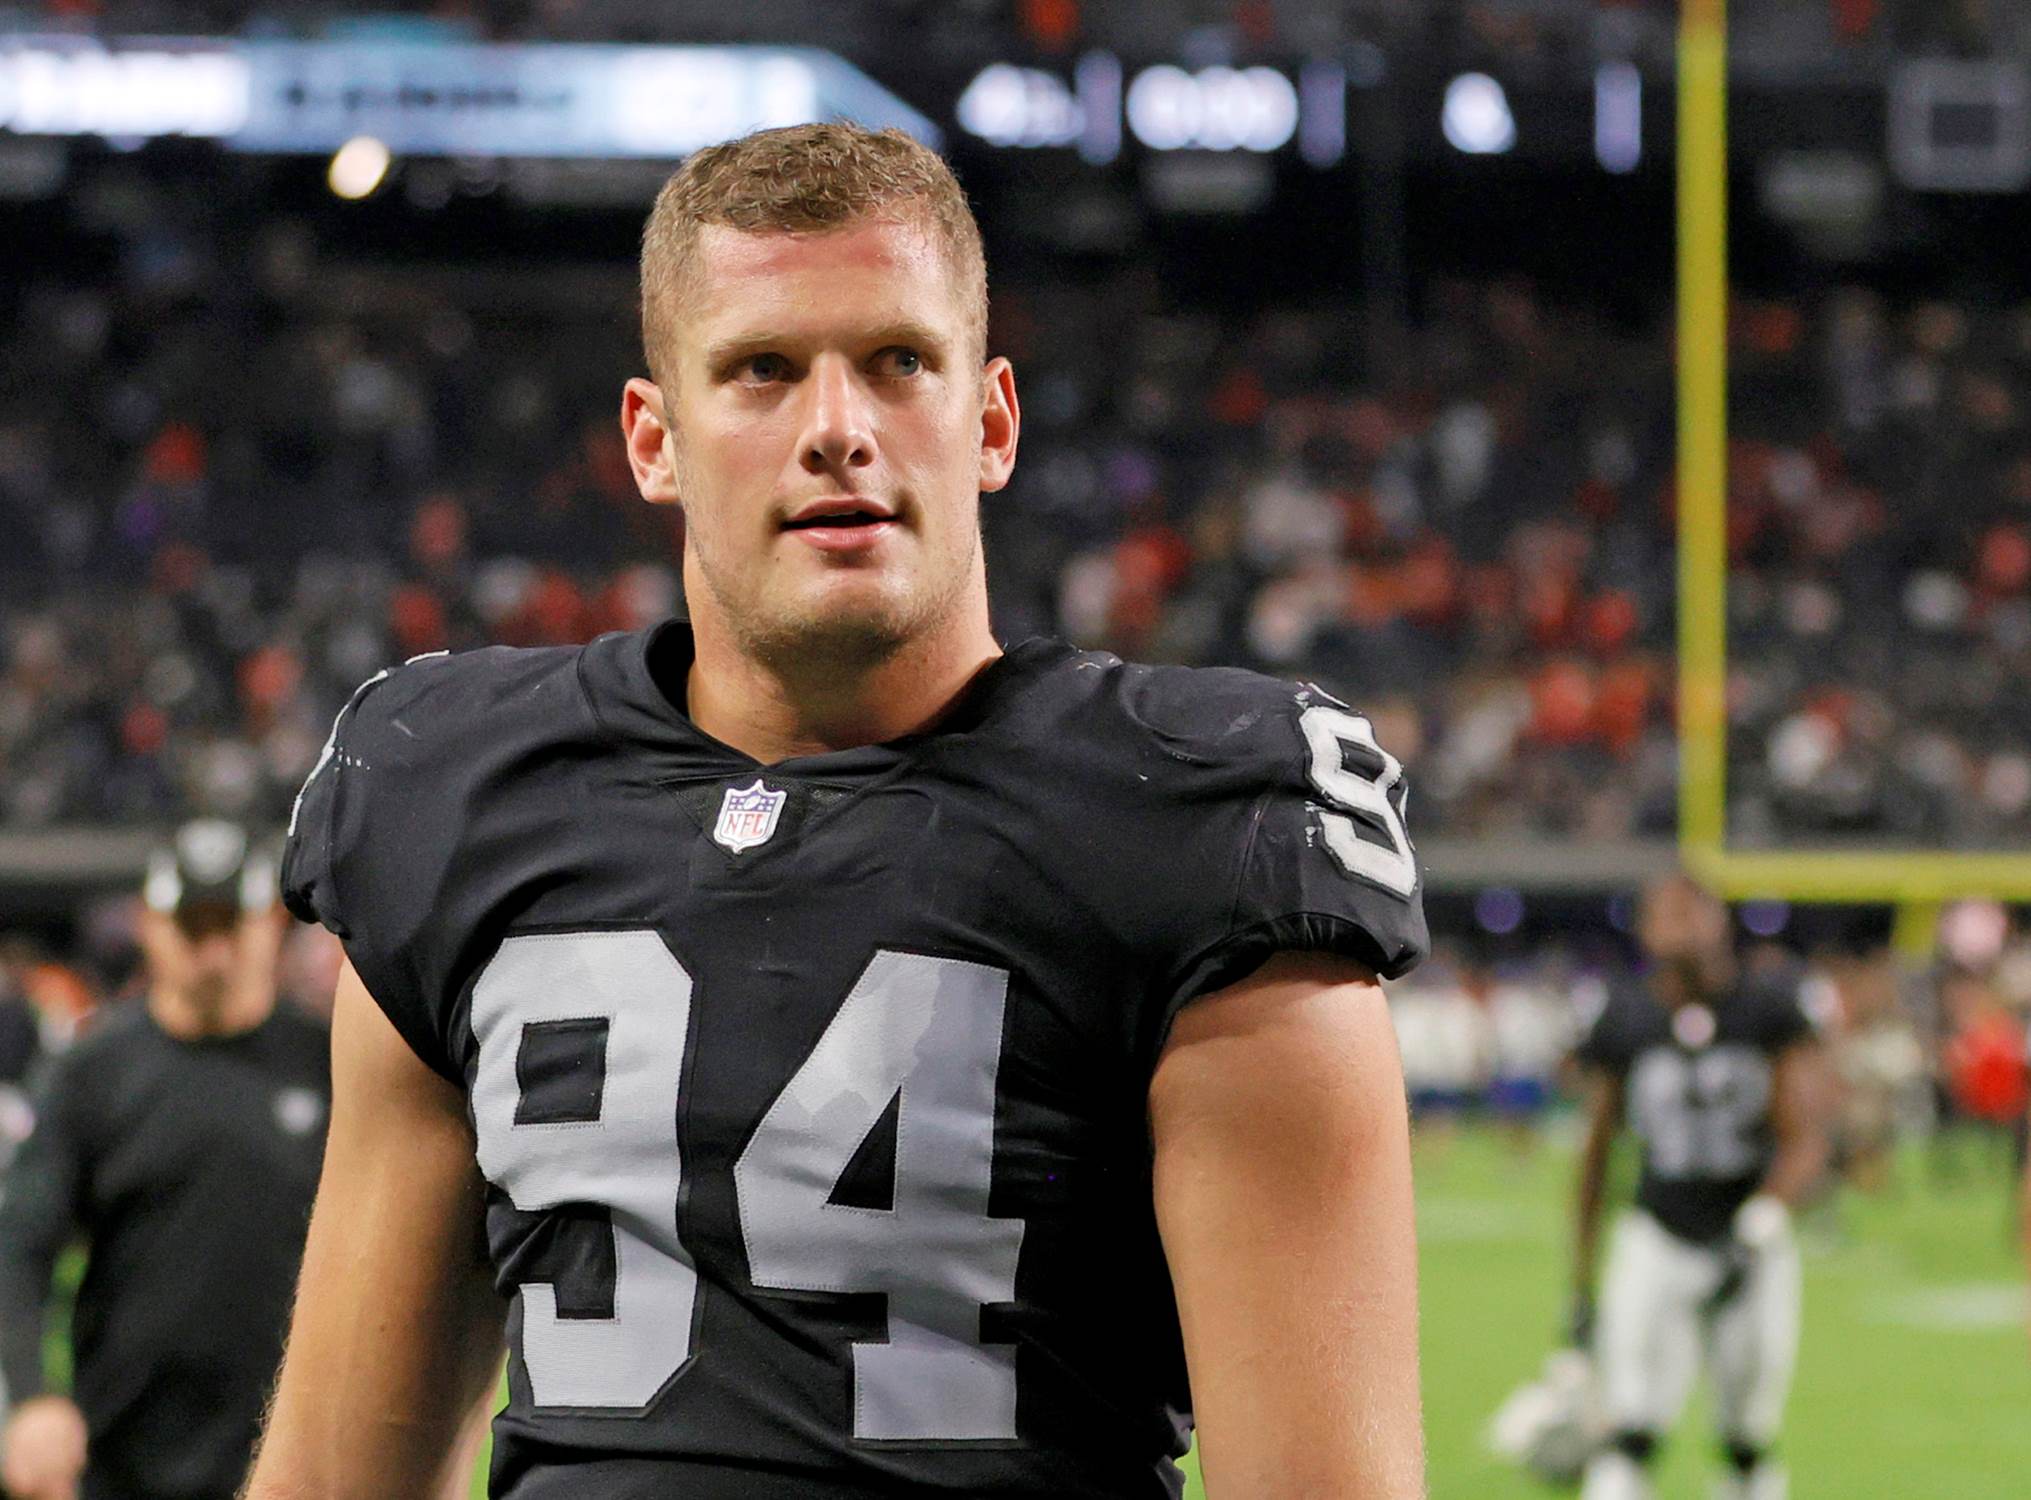 carl-nassib-first-openly-gay-active-player-retires-from-the-nfl